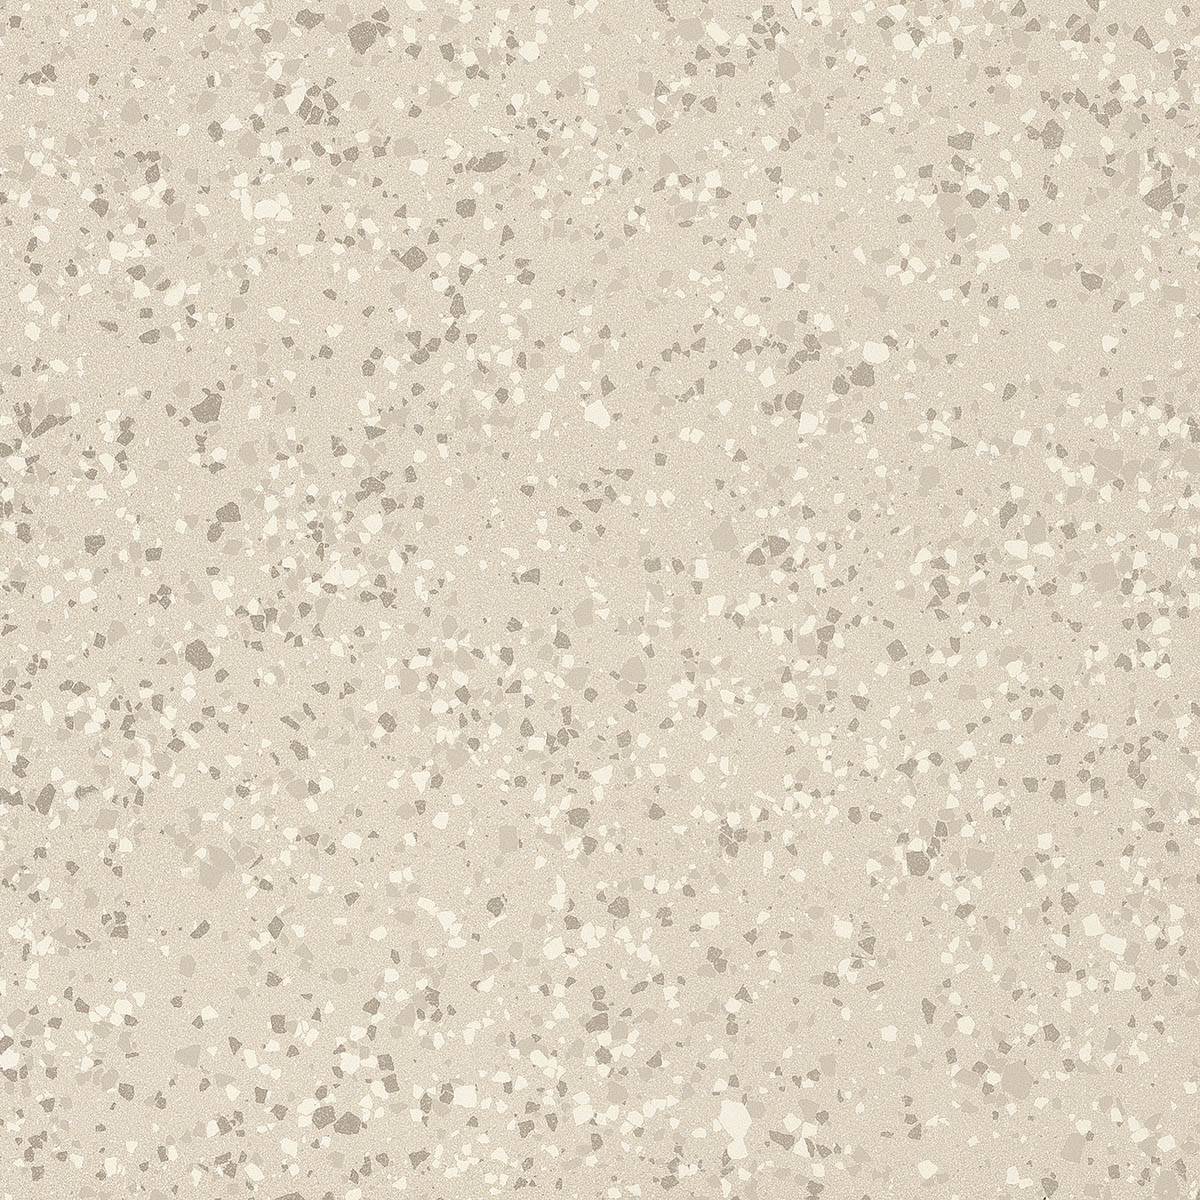 Imola Parade Bianco Natural Flat Matt Outdoor 166114 60x60cm rectified 10,5mm - PRDE RB60W RM